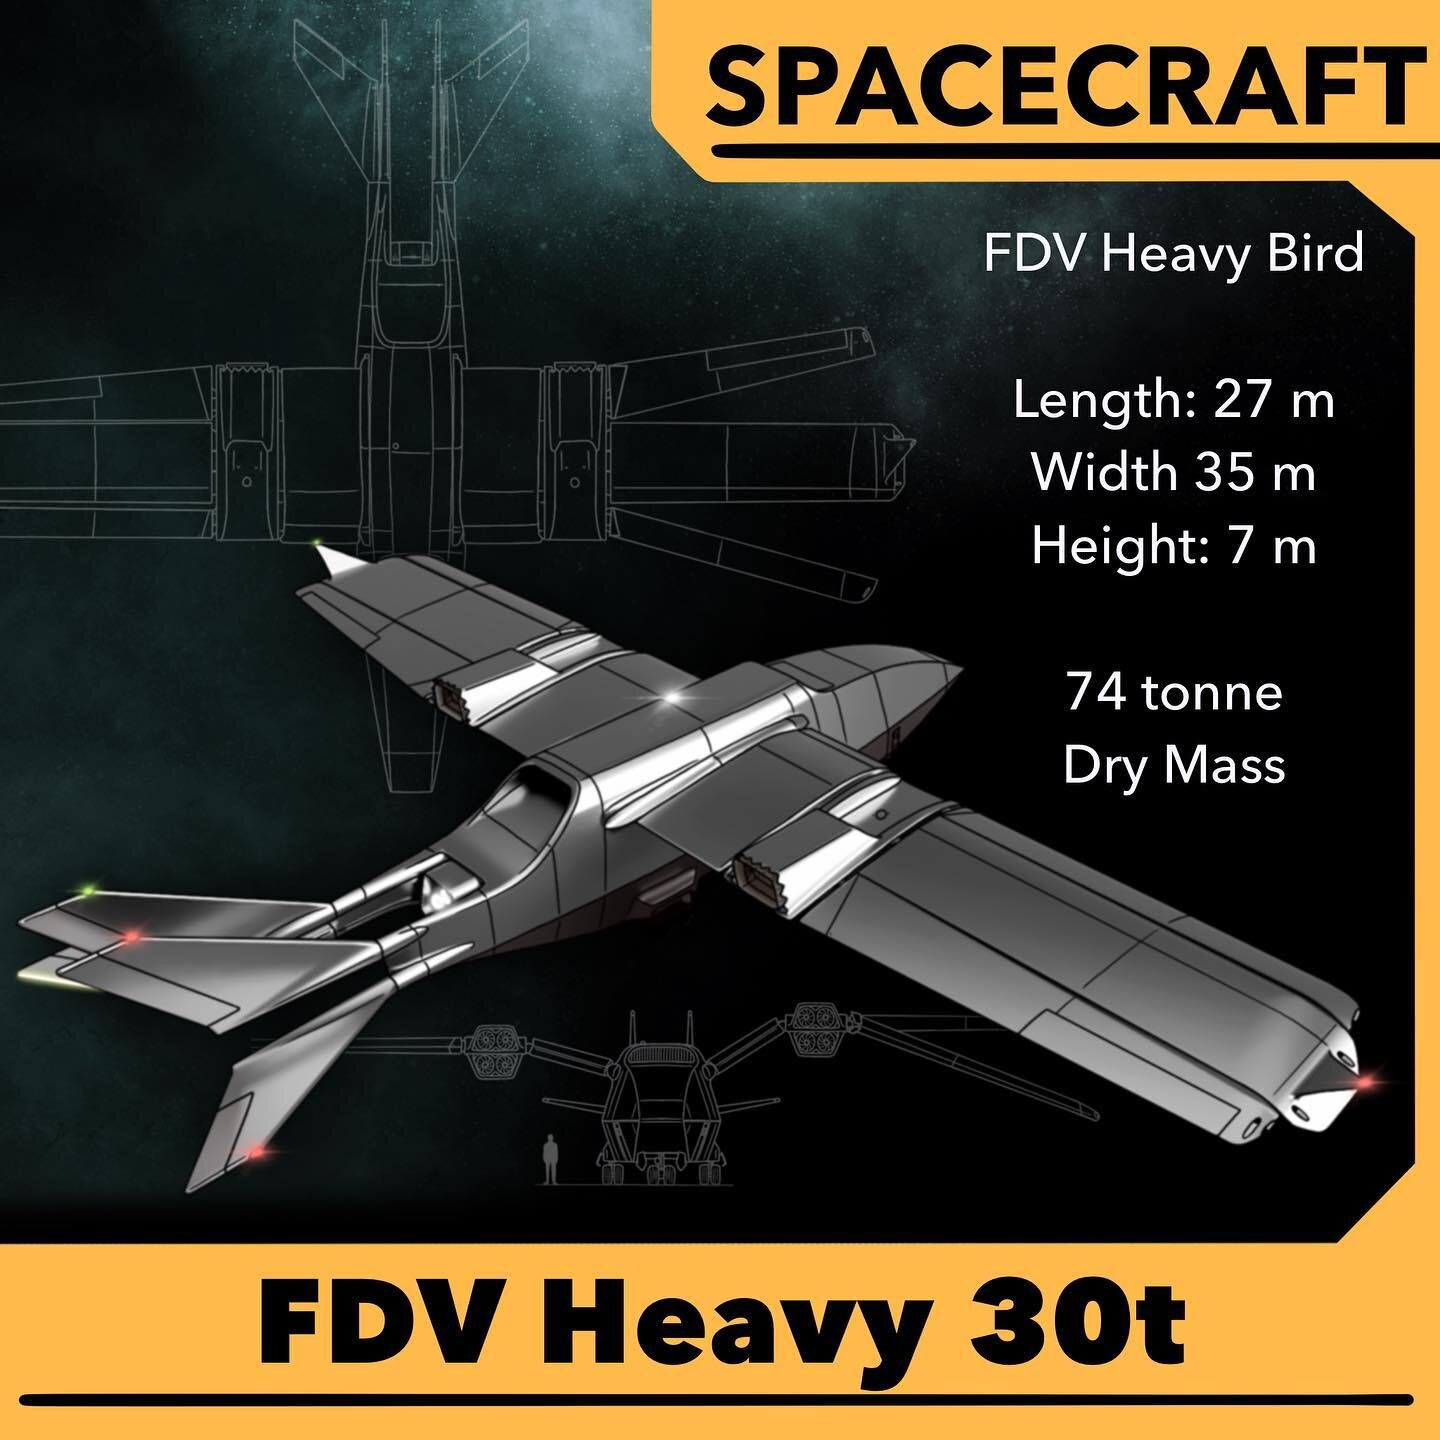 Designed to shuttle cargo from surface-to-orbit and back again, the FDV Heavy features large articulated wings, 8 jet turbines for atmospherical flight, and a cluster of 5 ion thrusters for trans-orbital maneuvers or gateway assisted interstellar tra